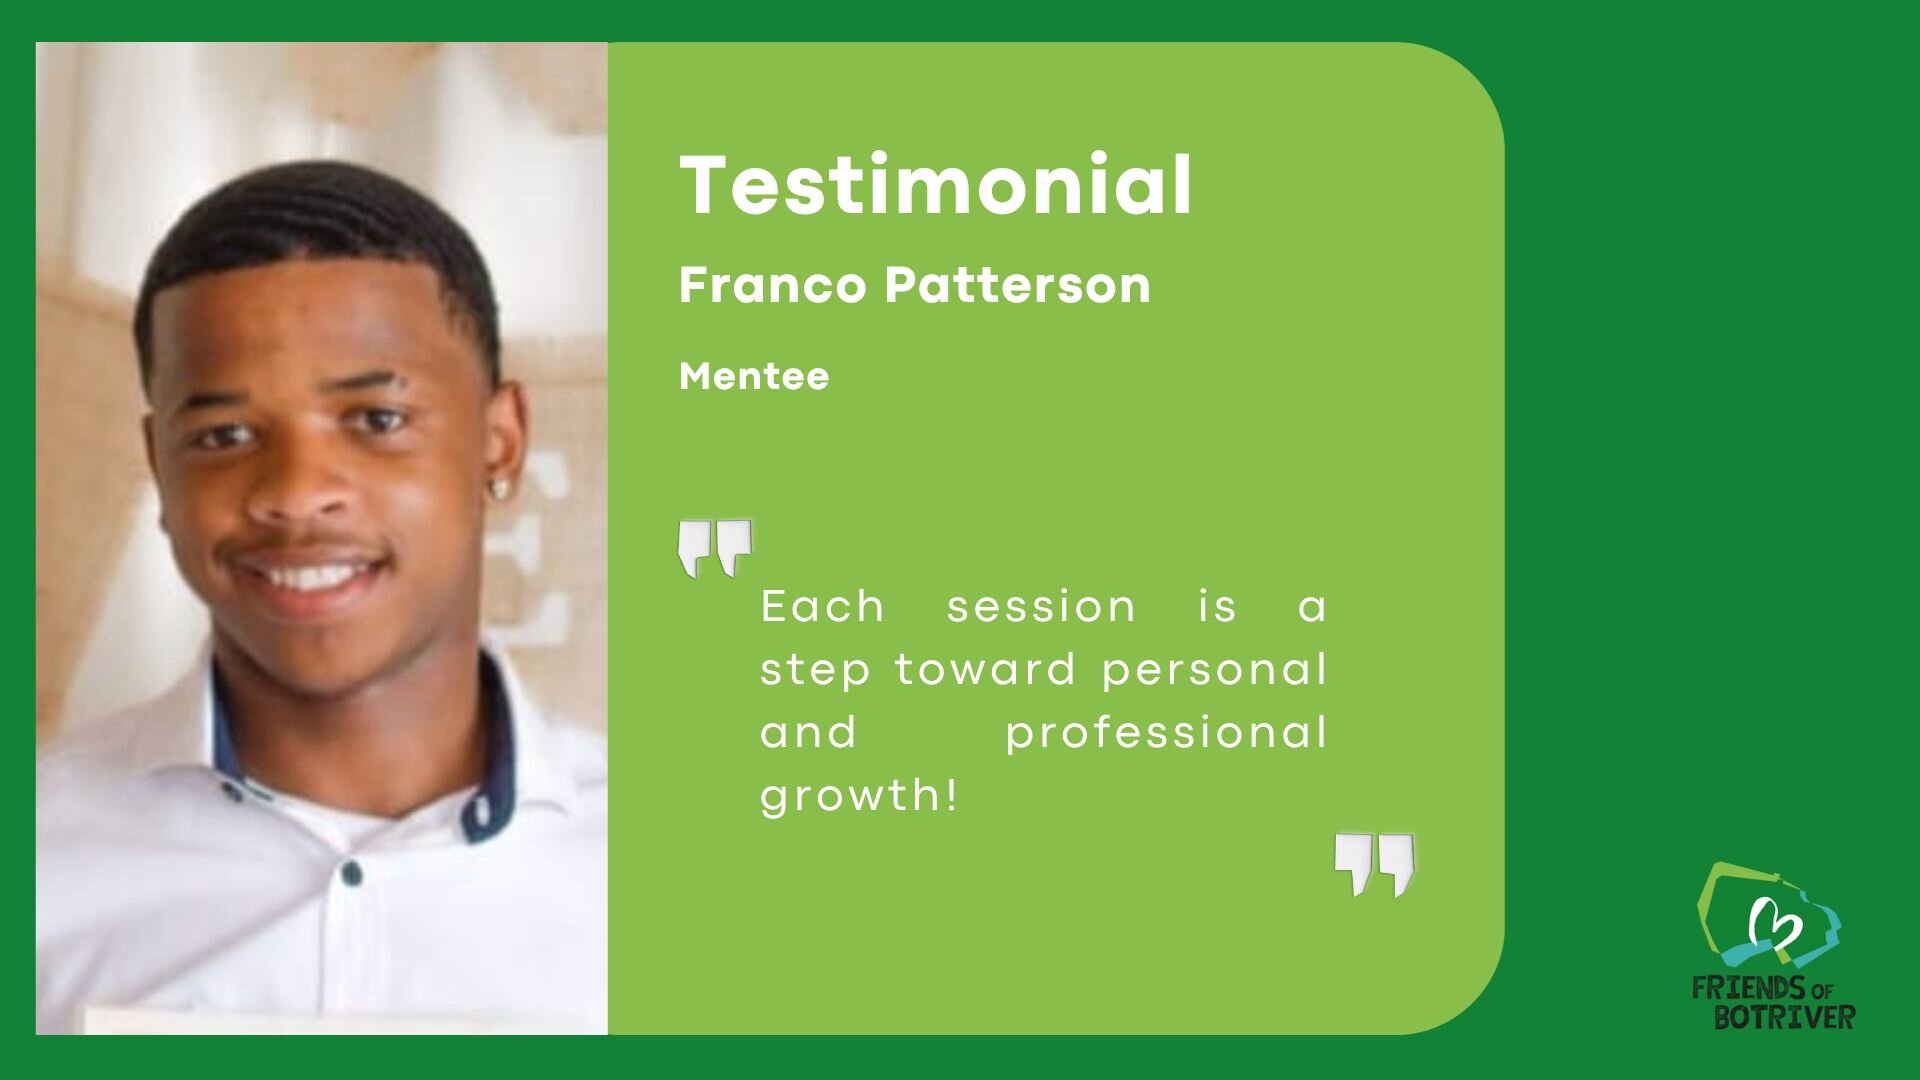 Testimonial from Max&rsquo;s mentee Franco 💚

🌐 Joining the mentorship program was nerve-wracking at first, especially with the new experience of Zoom meetings. Over time, I got used to it, and my initial mentor, Elke, made it a comfortable journey